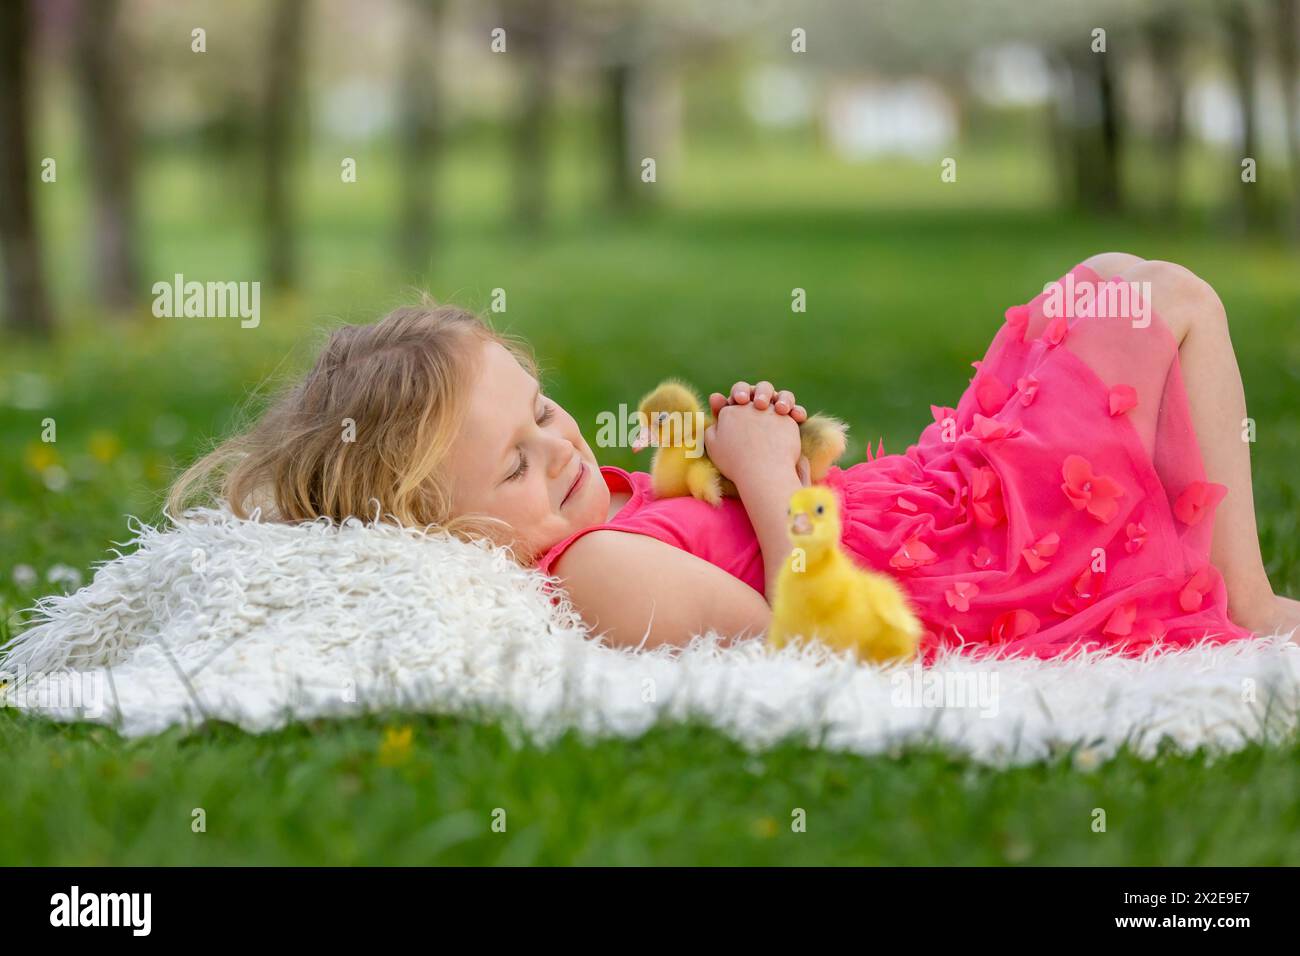 Happy beautiful child, kid, playing with small beautiful ducklings or goslings, cute fluffy yellow animal birds Stock Photo